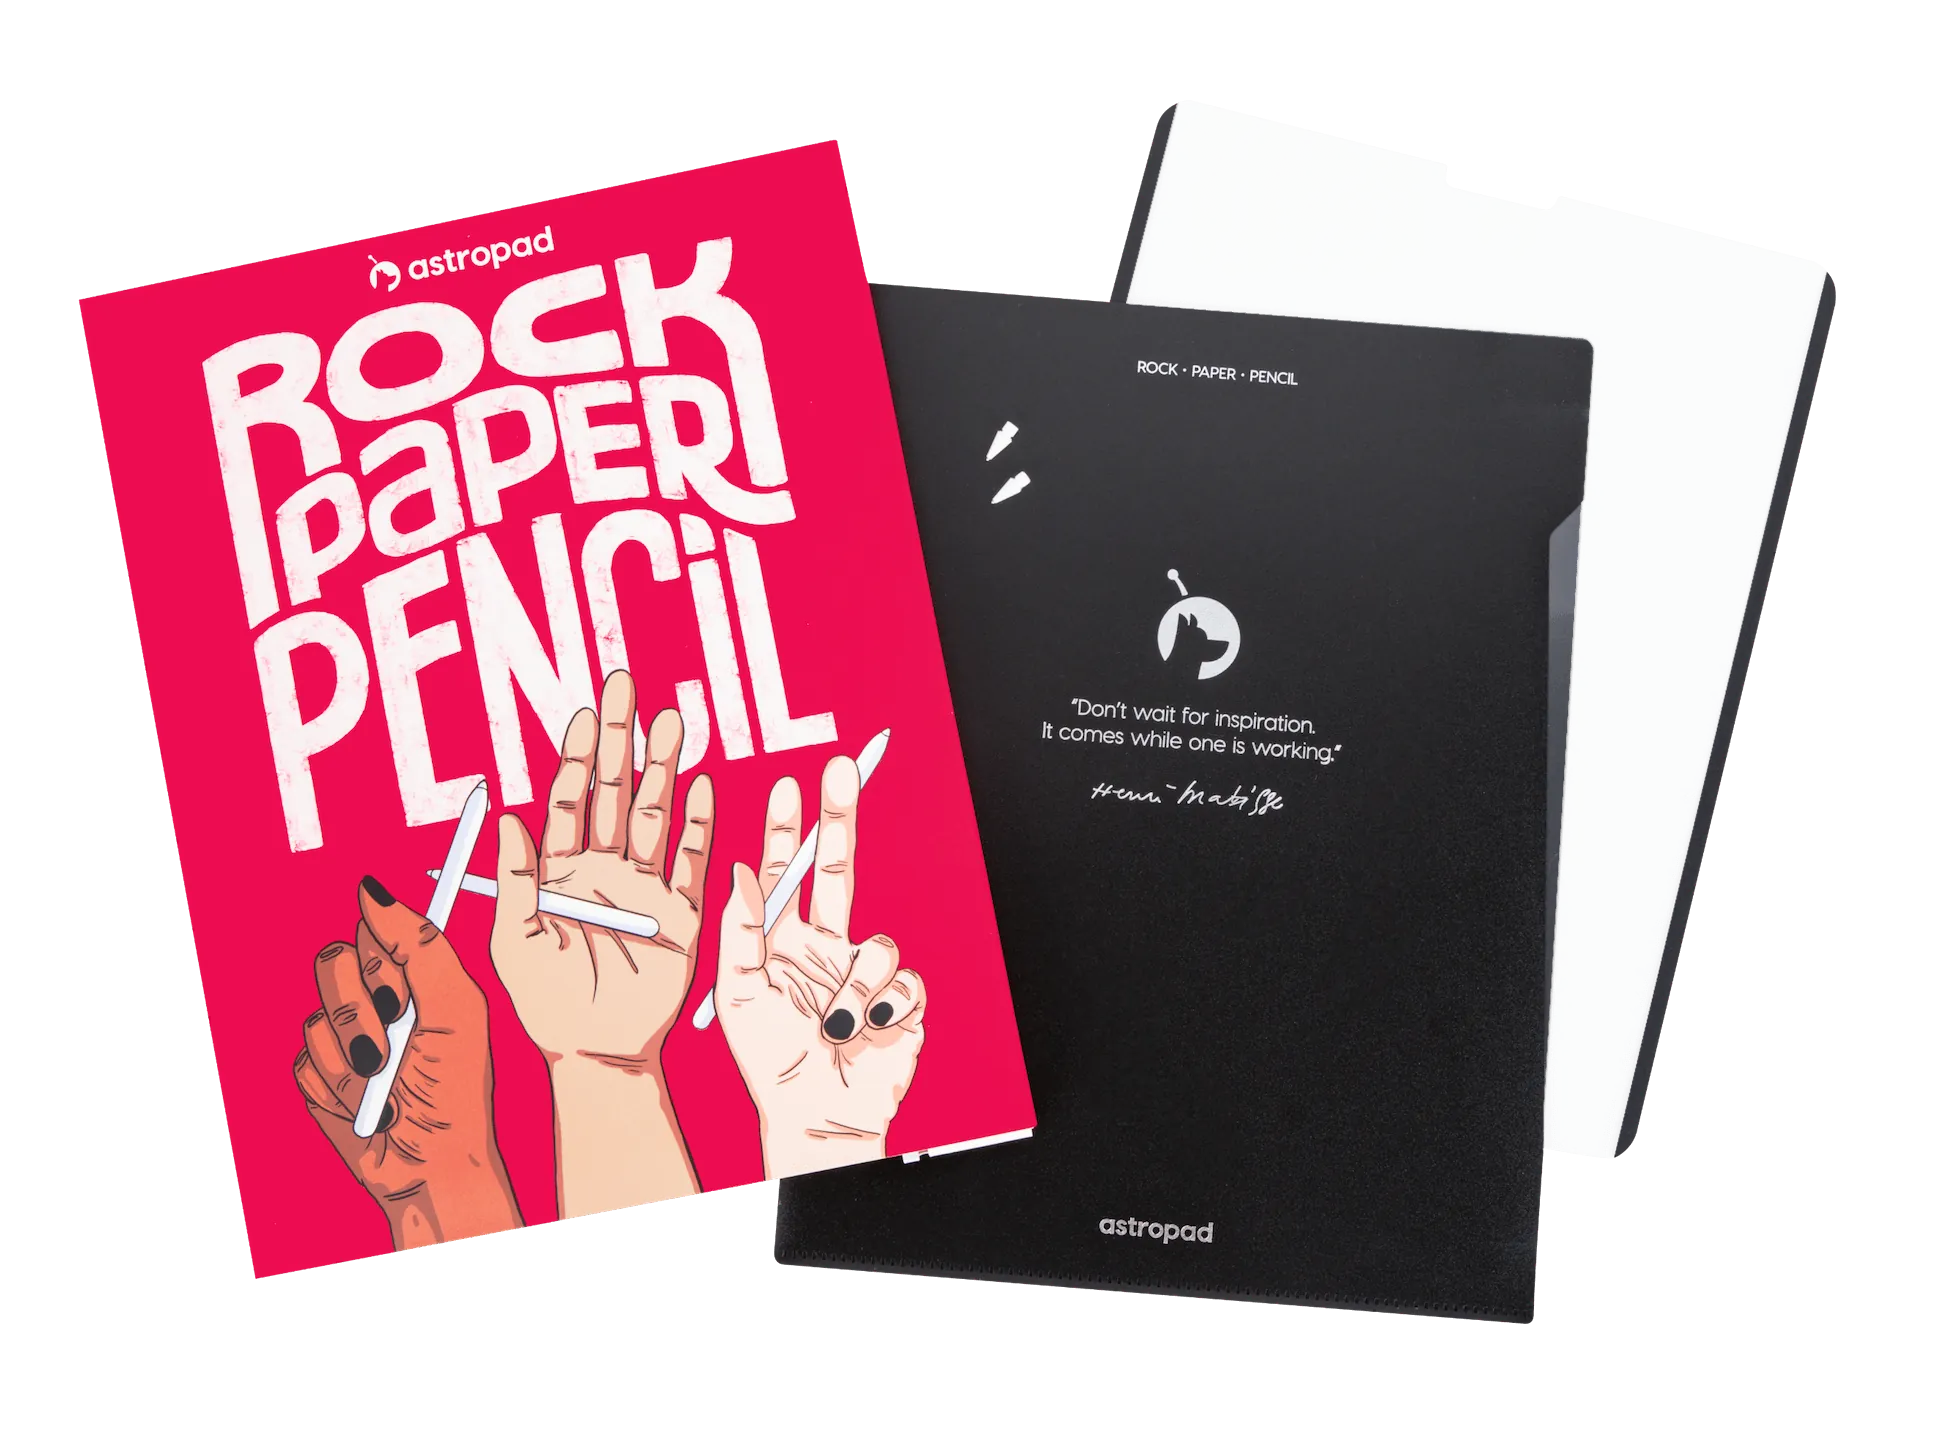 Rock Paper Pencil: The New Product for Digital Artists from Astropad -  Apple Watch Armbands